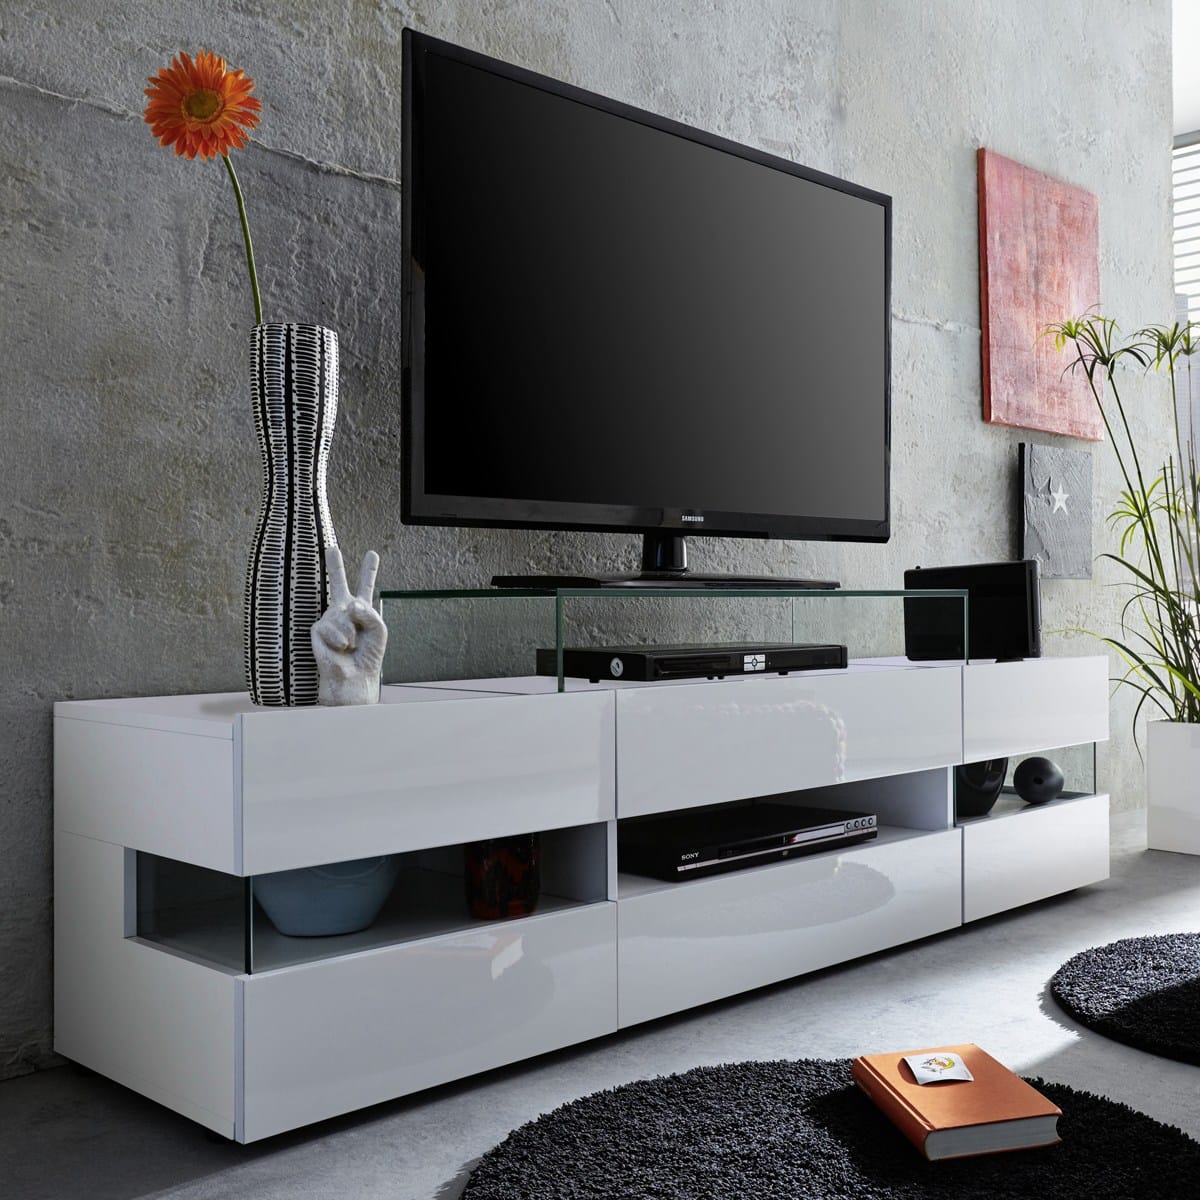 Are You Getting the Most Out of Your TV Stand? | home improvement